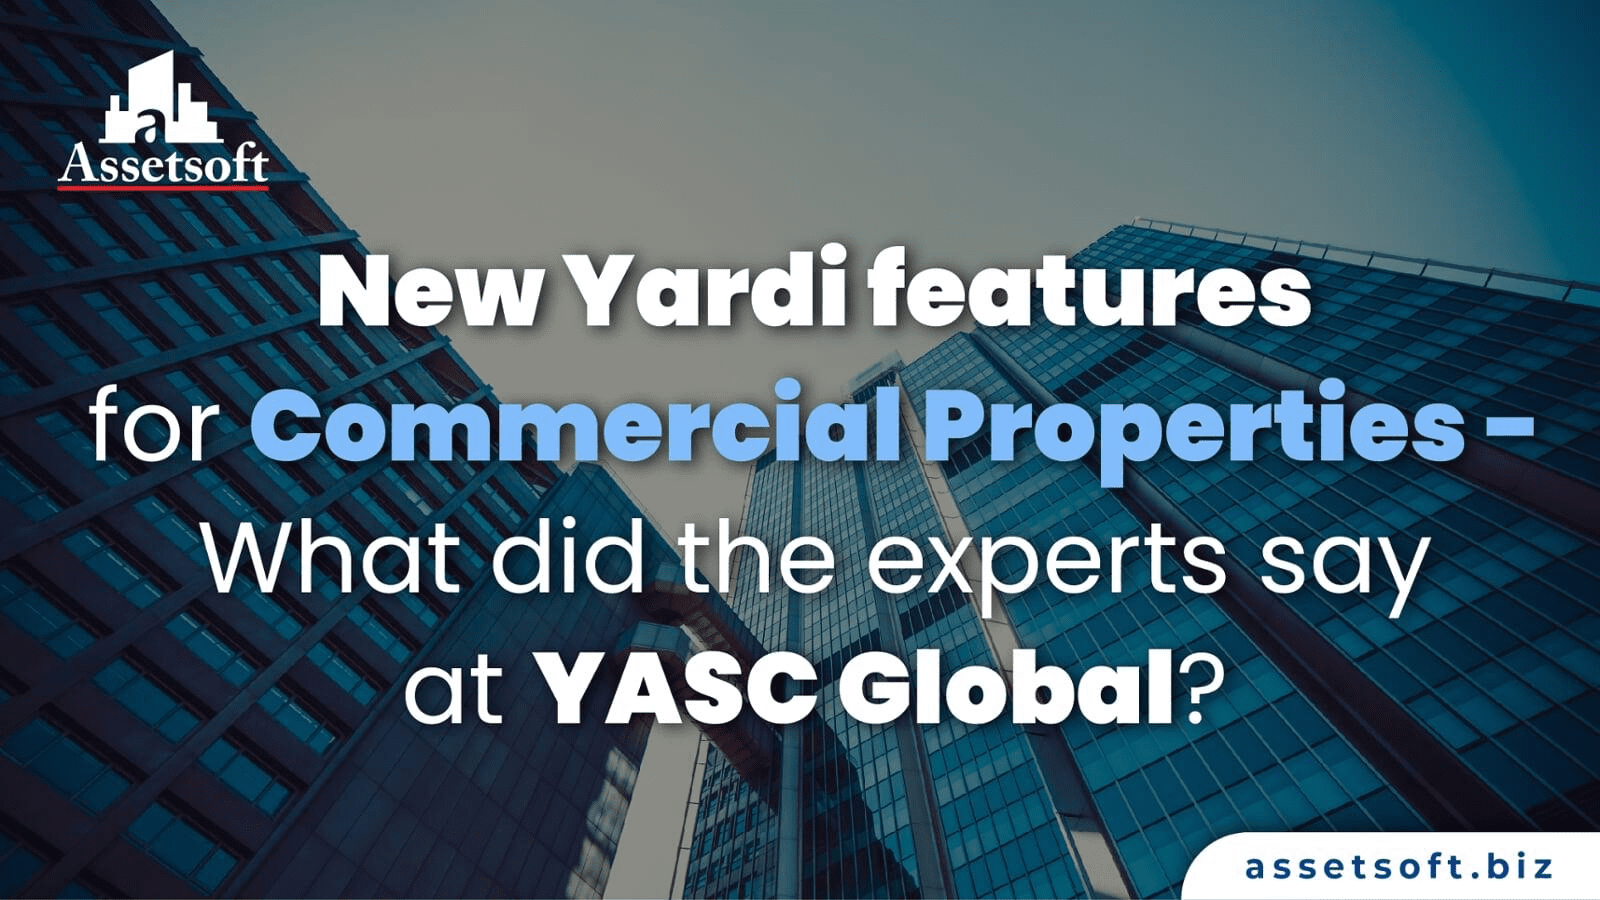 New Yardi features for Commercial Properties - What did the experts say at YASC Global?